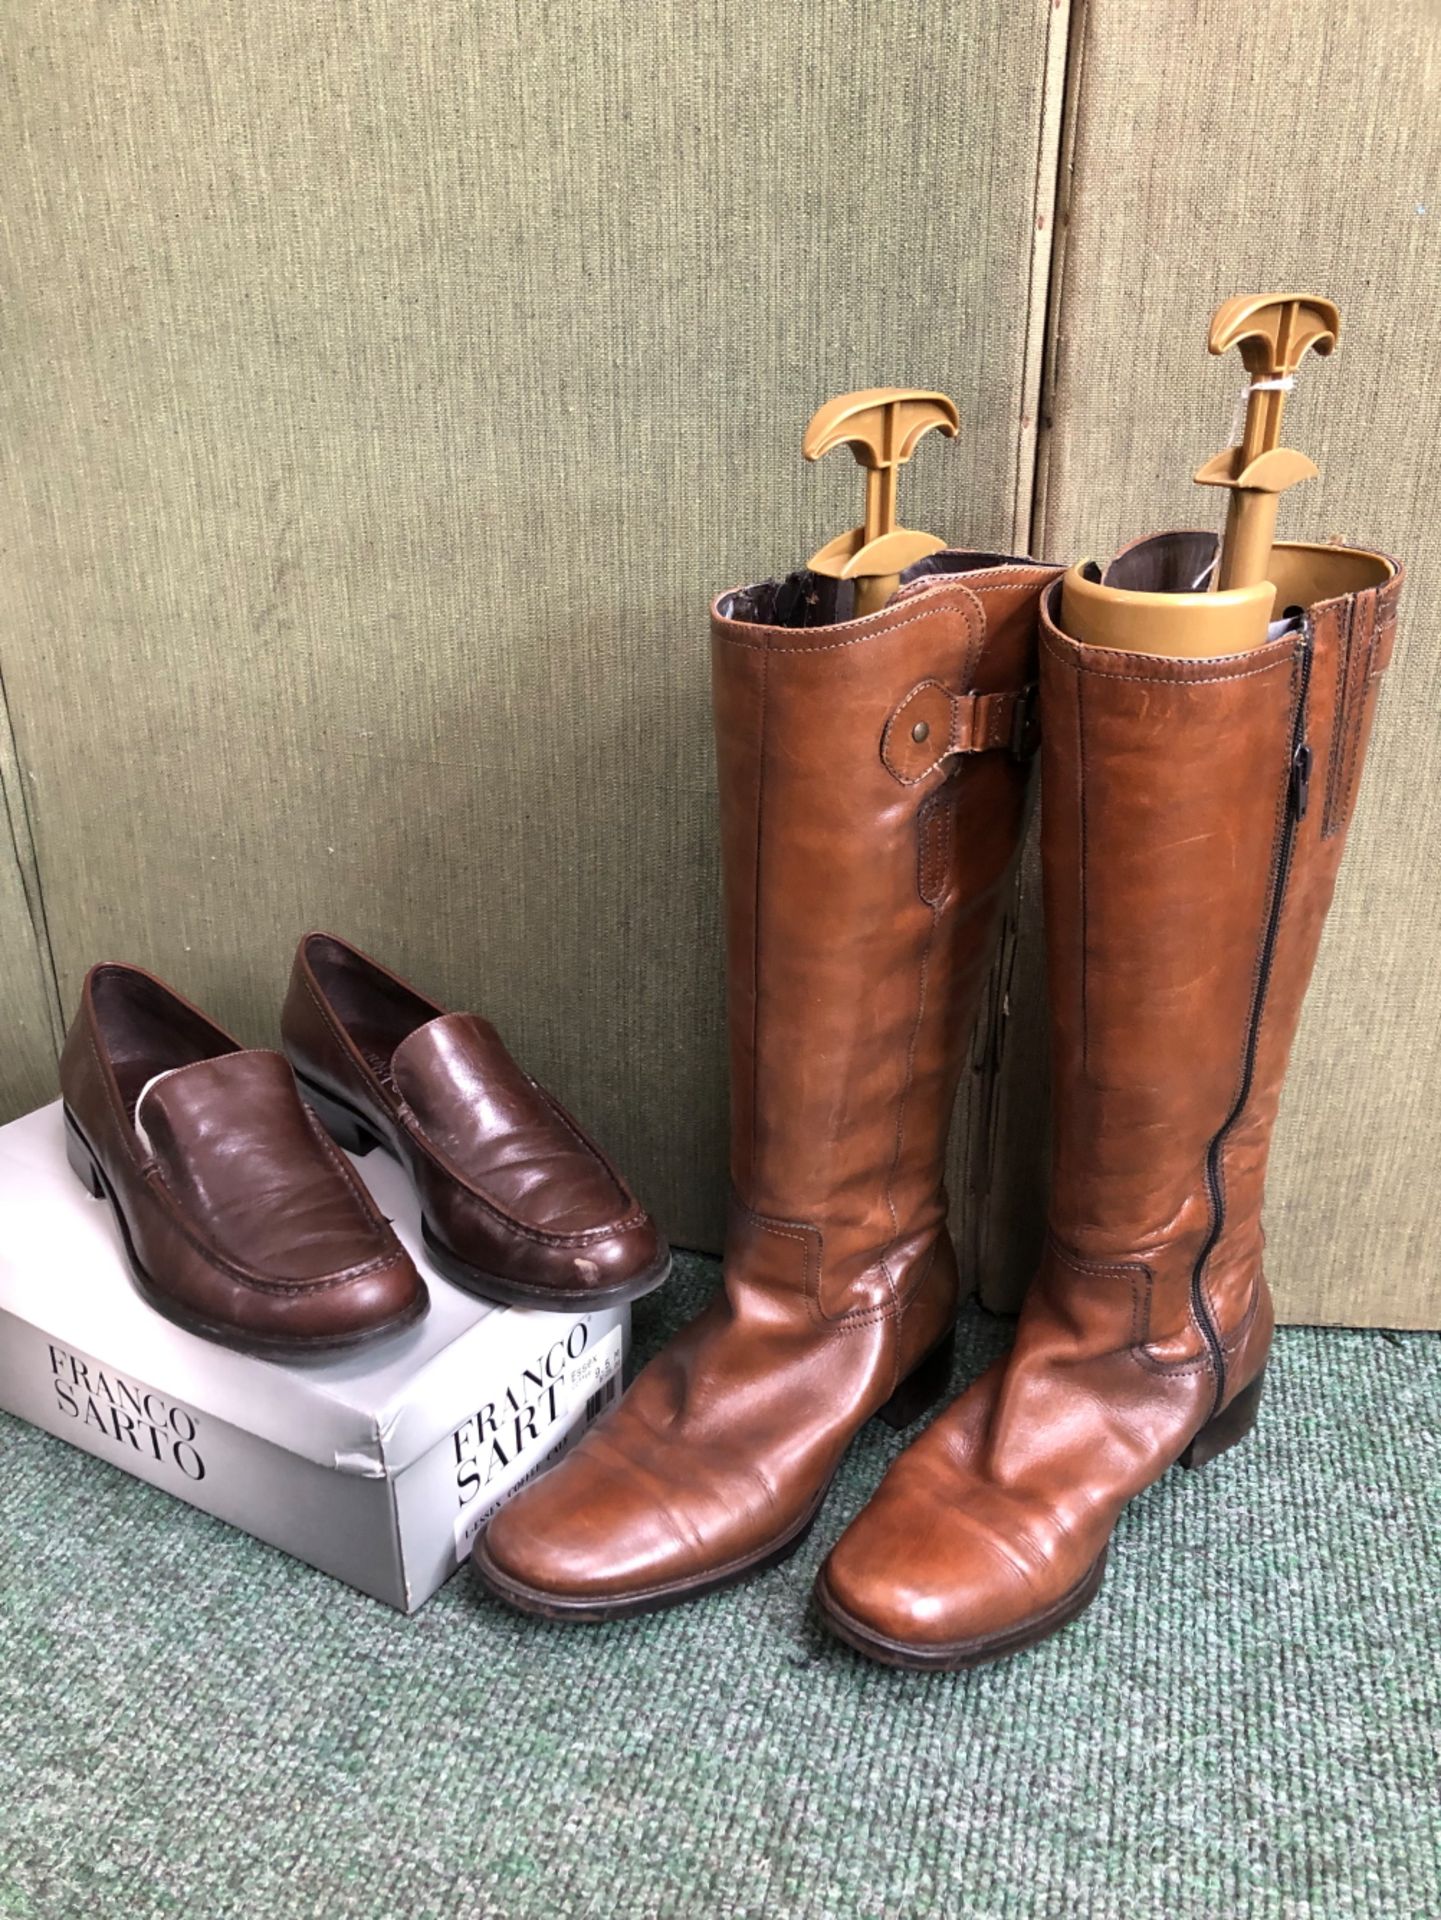 BOOTS. A LONG PAIR OF YOUR SIXTH SENSE BROWN BOOTS SIZE EUR 40, TOGETHER WITH A PAIR OF FRANCO SARTO